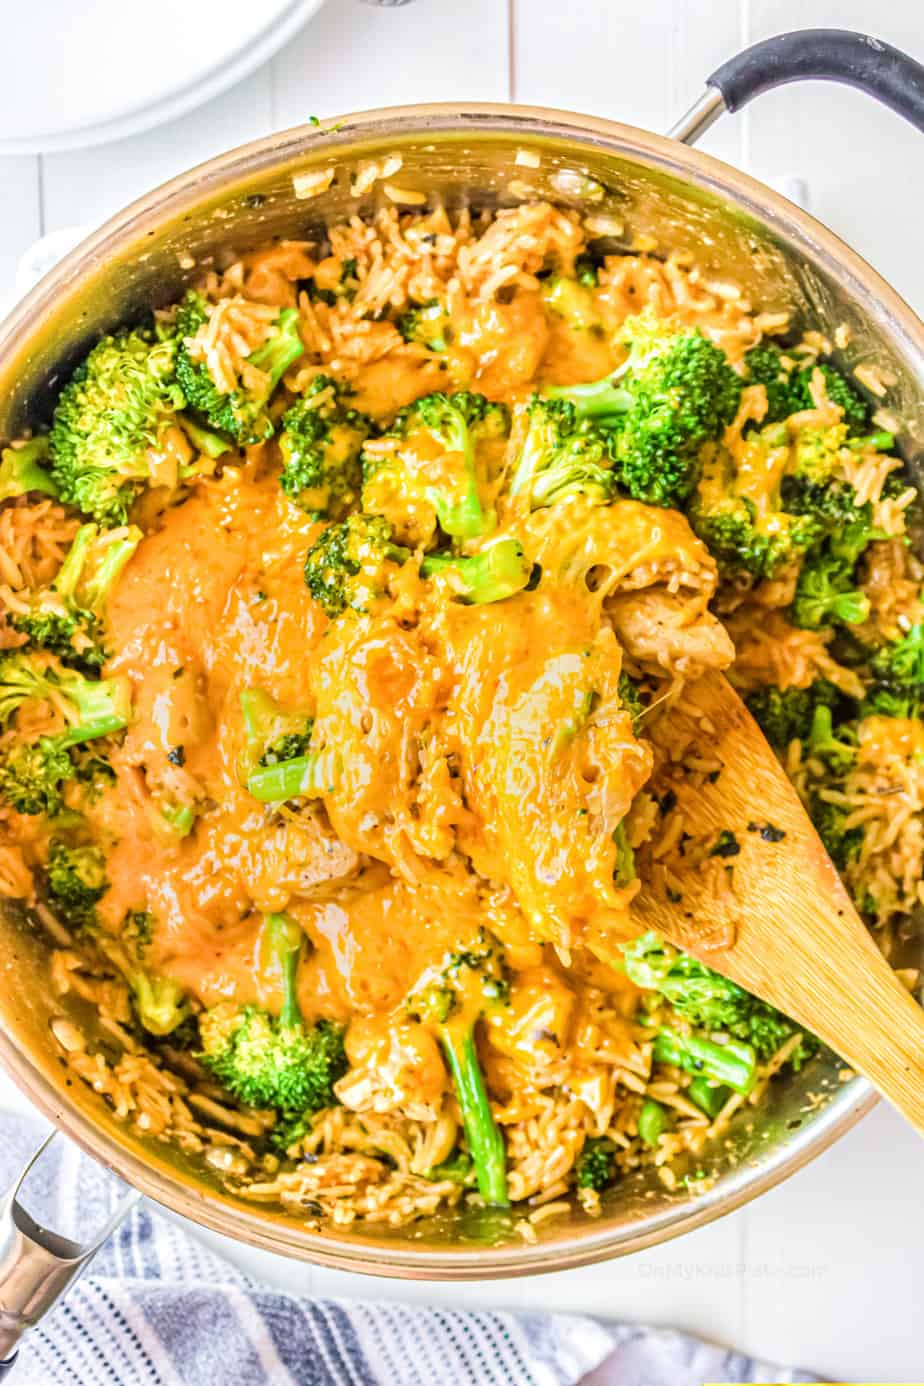 Chicken, cheese, broccoli and rice in a pan with a wooden spoon from overhead.